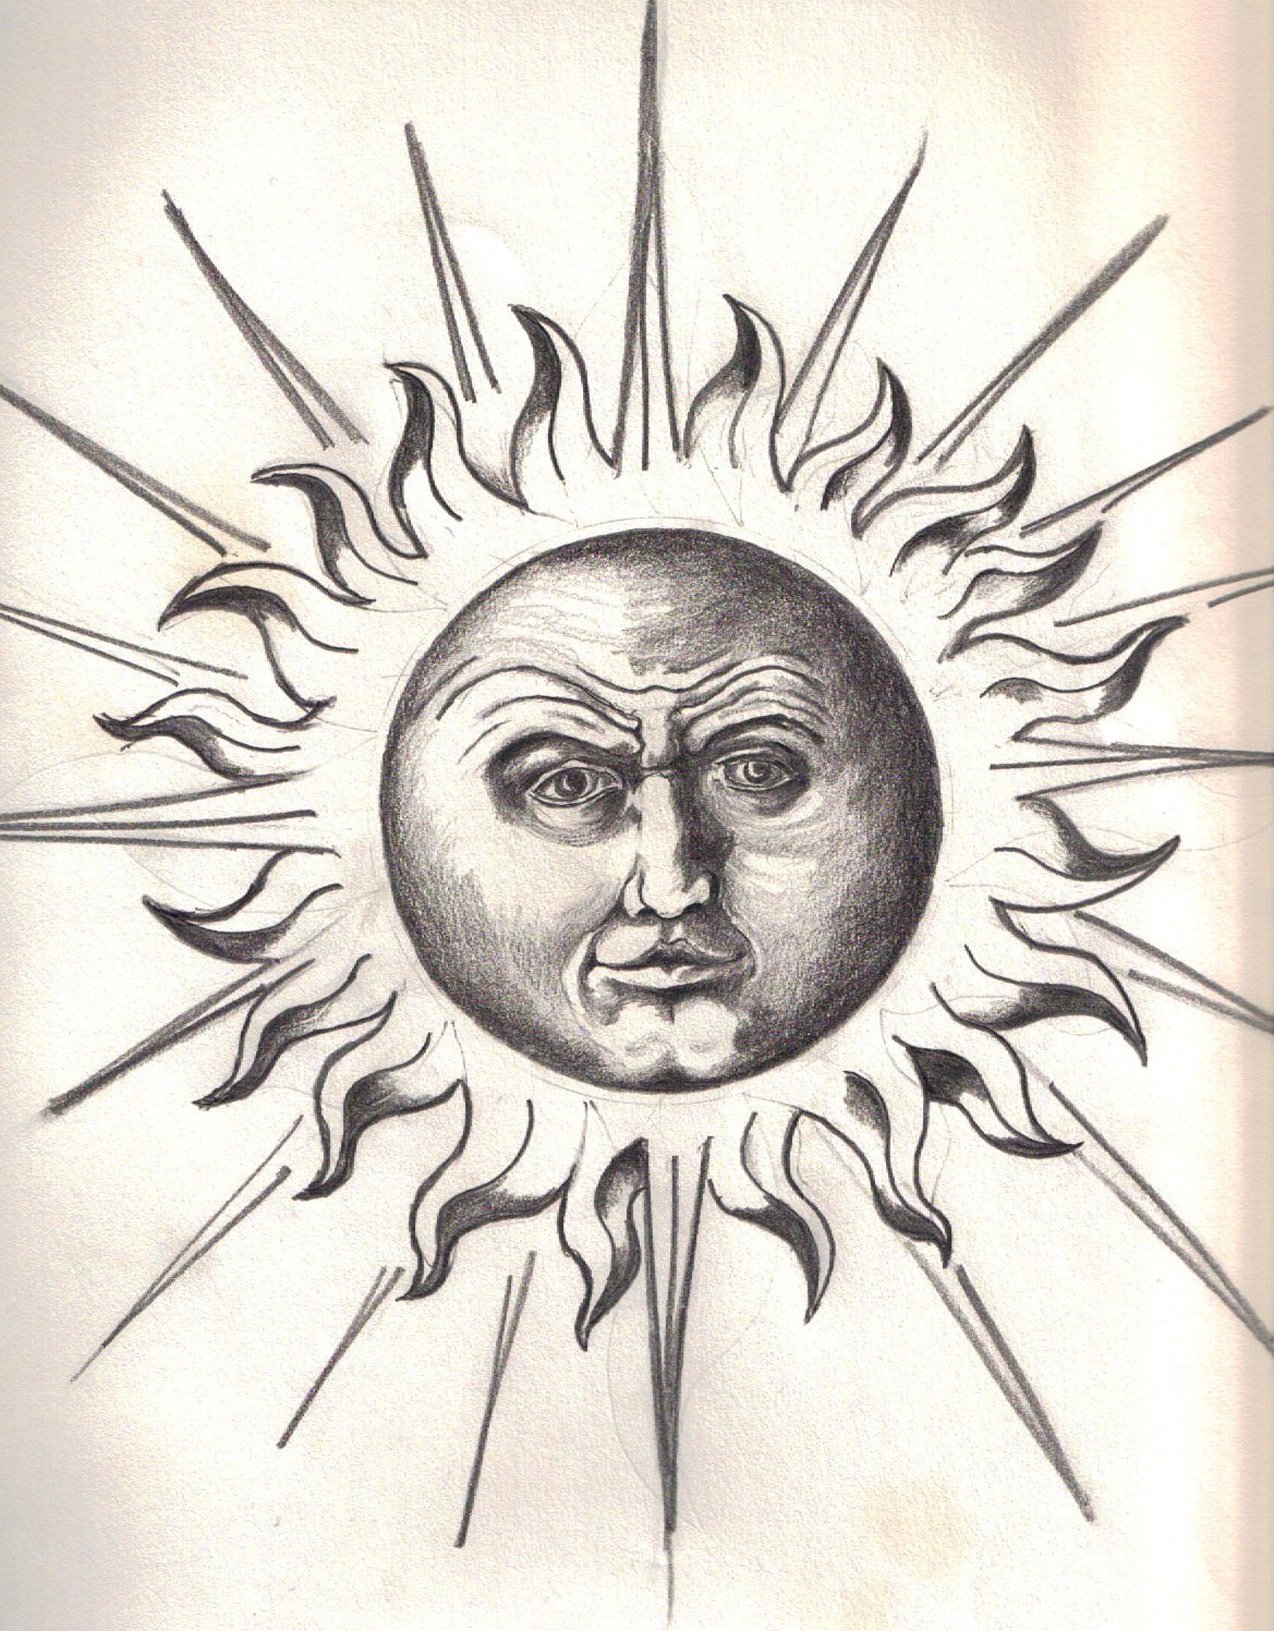 Woodland sun  pencil sketch  A pencil drawing done with an  Flickr